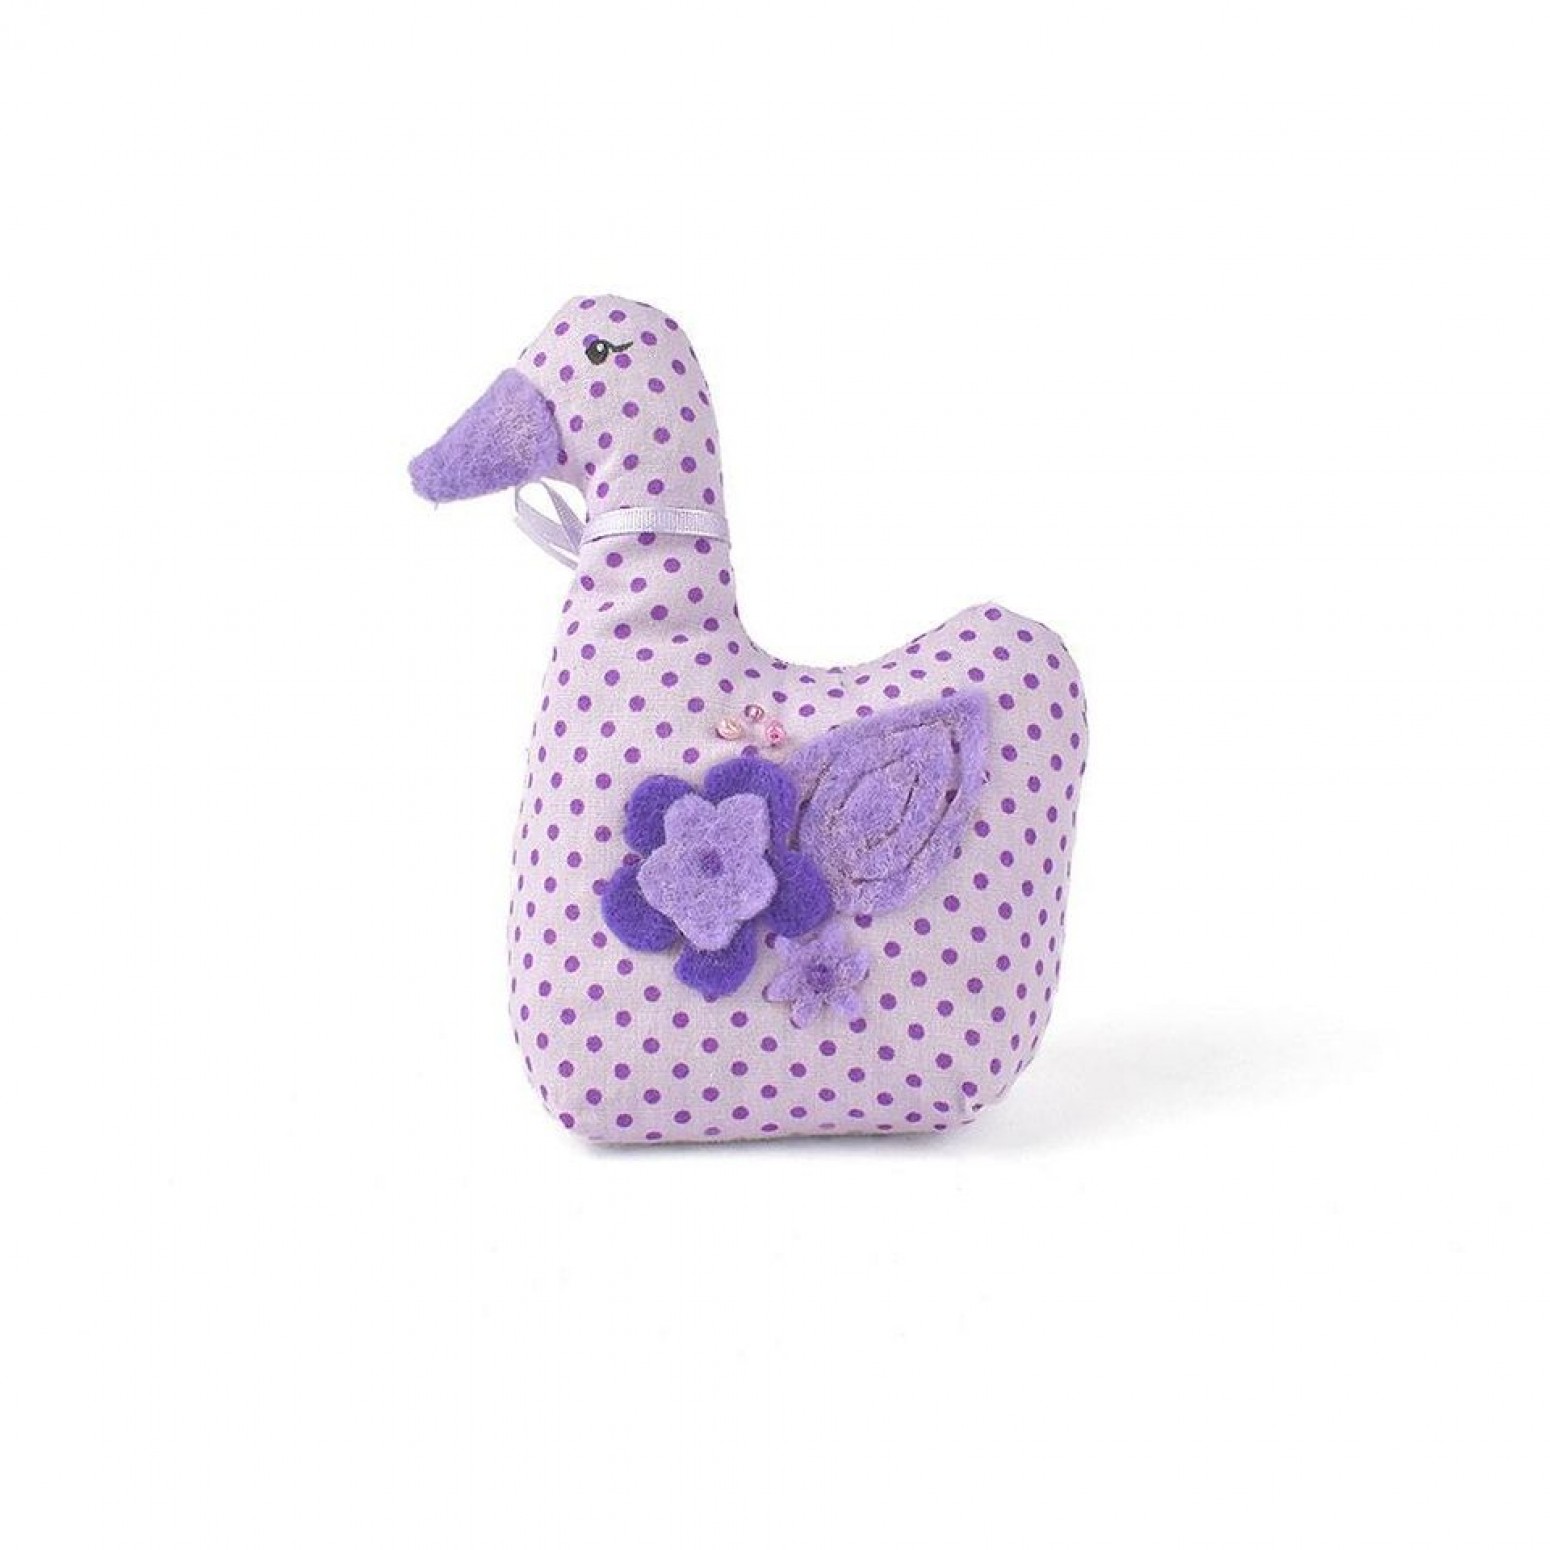 Doll with lavender flower - duckling